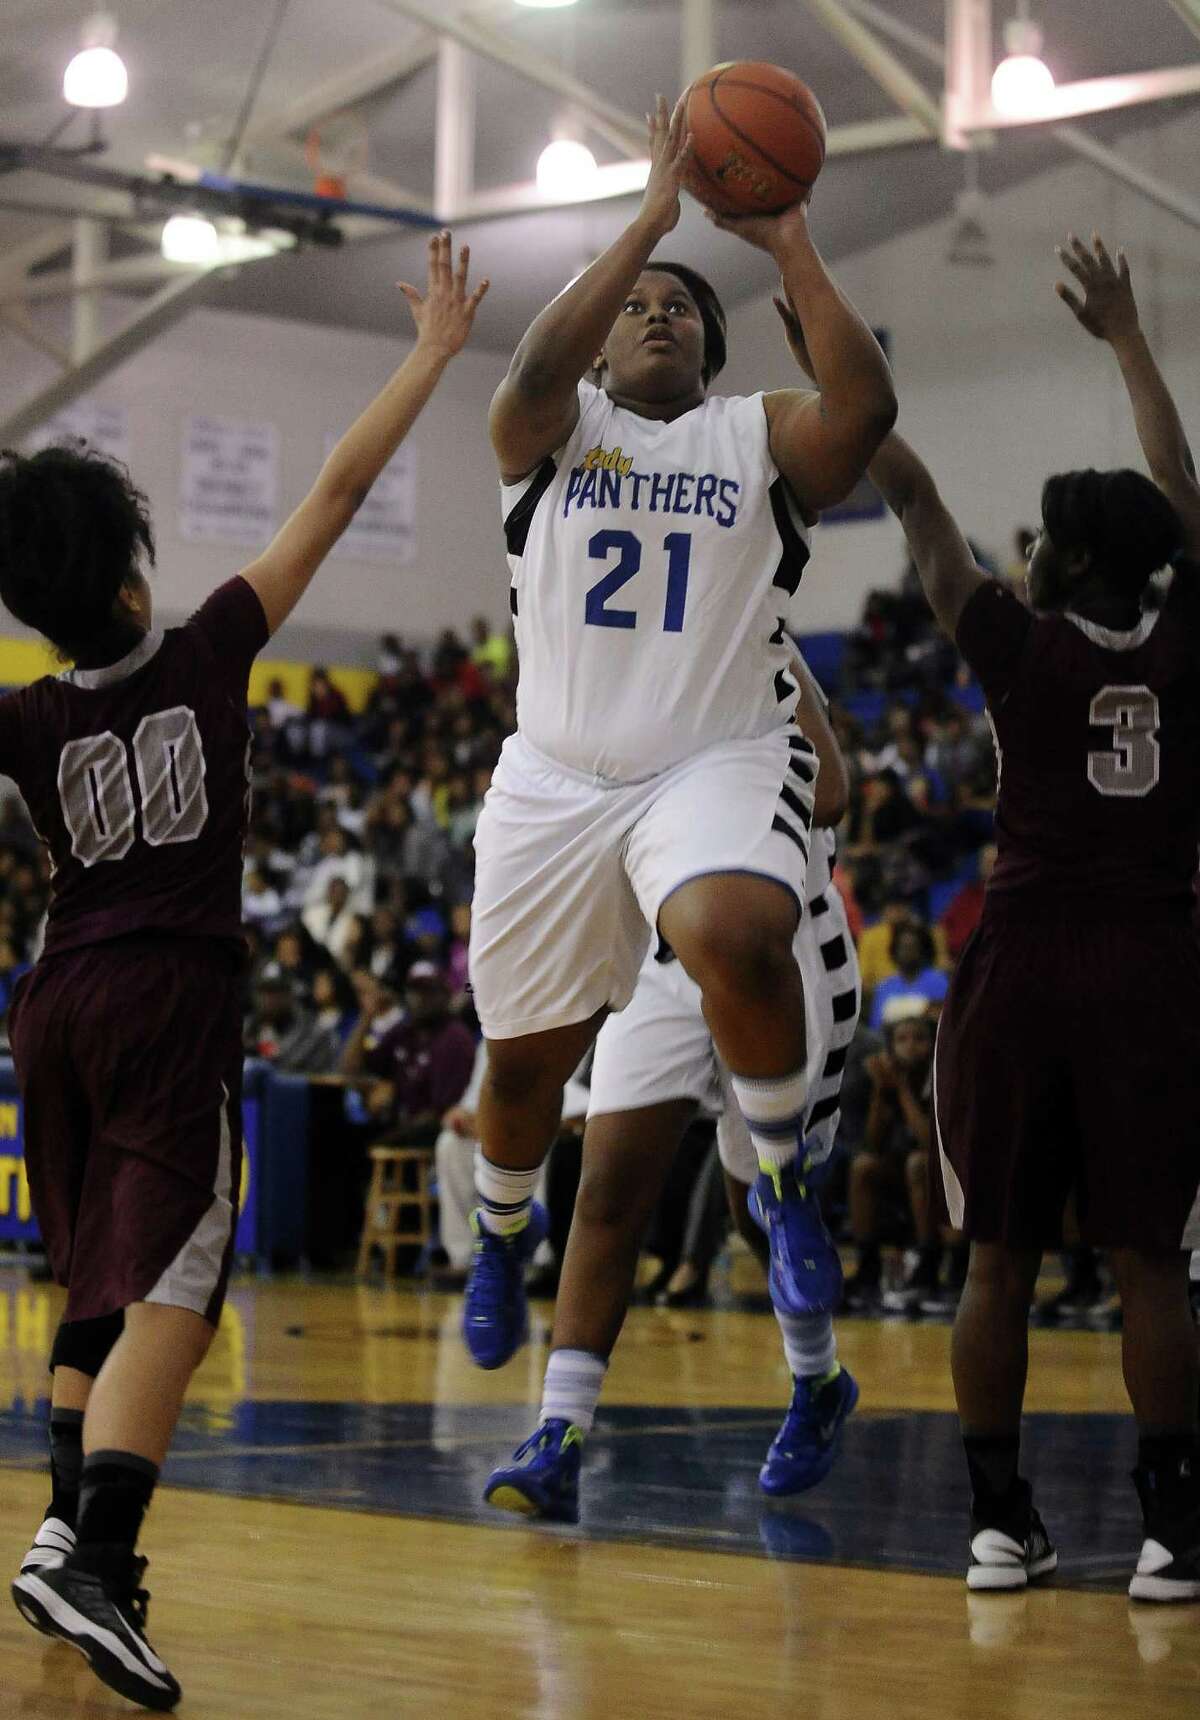 Ozen Lady Panther Nekia Jones, #21, puts it up for two during the Ozen High School girls basketball game against Central High School on Tuesday, January 22, 2013, at Ozen High School. Ozen won 63 - 53. Photo taken: Randy Edwards/The Enterprise